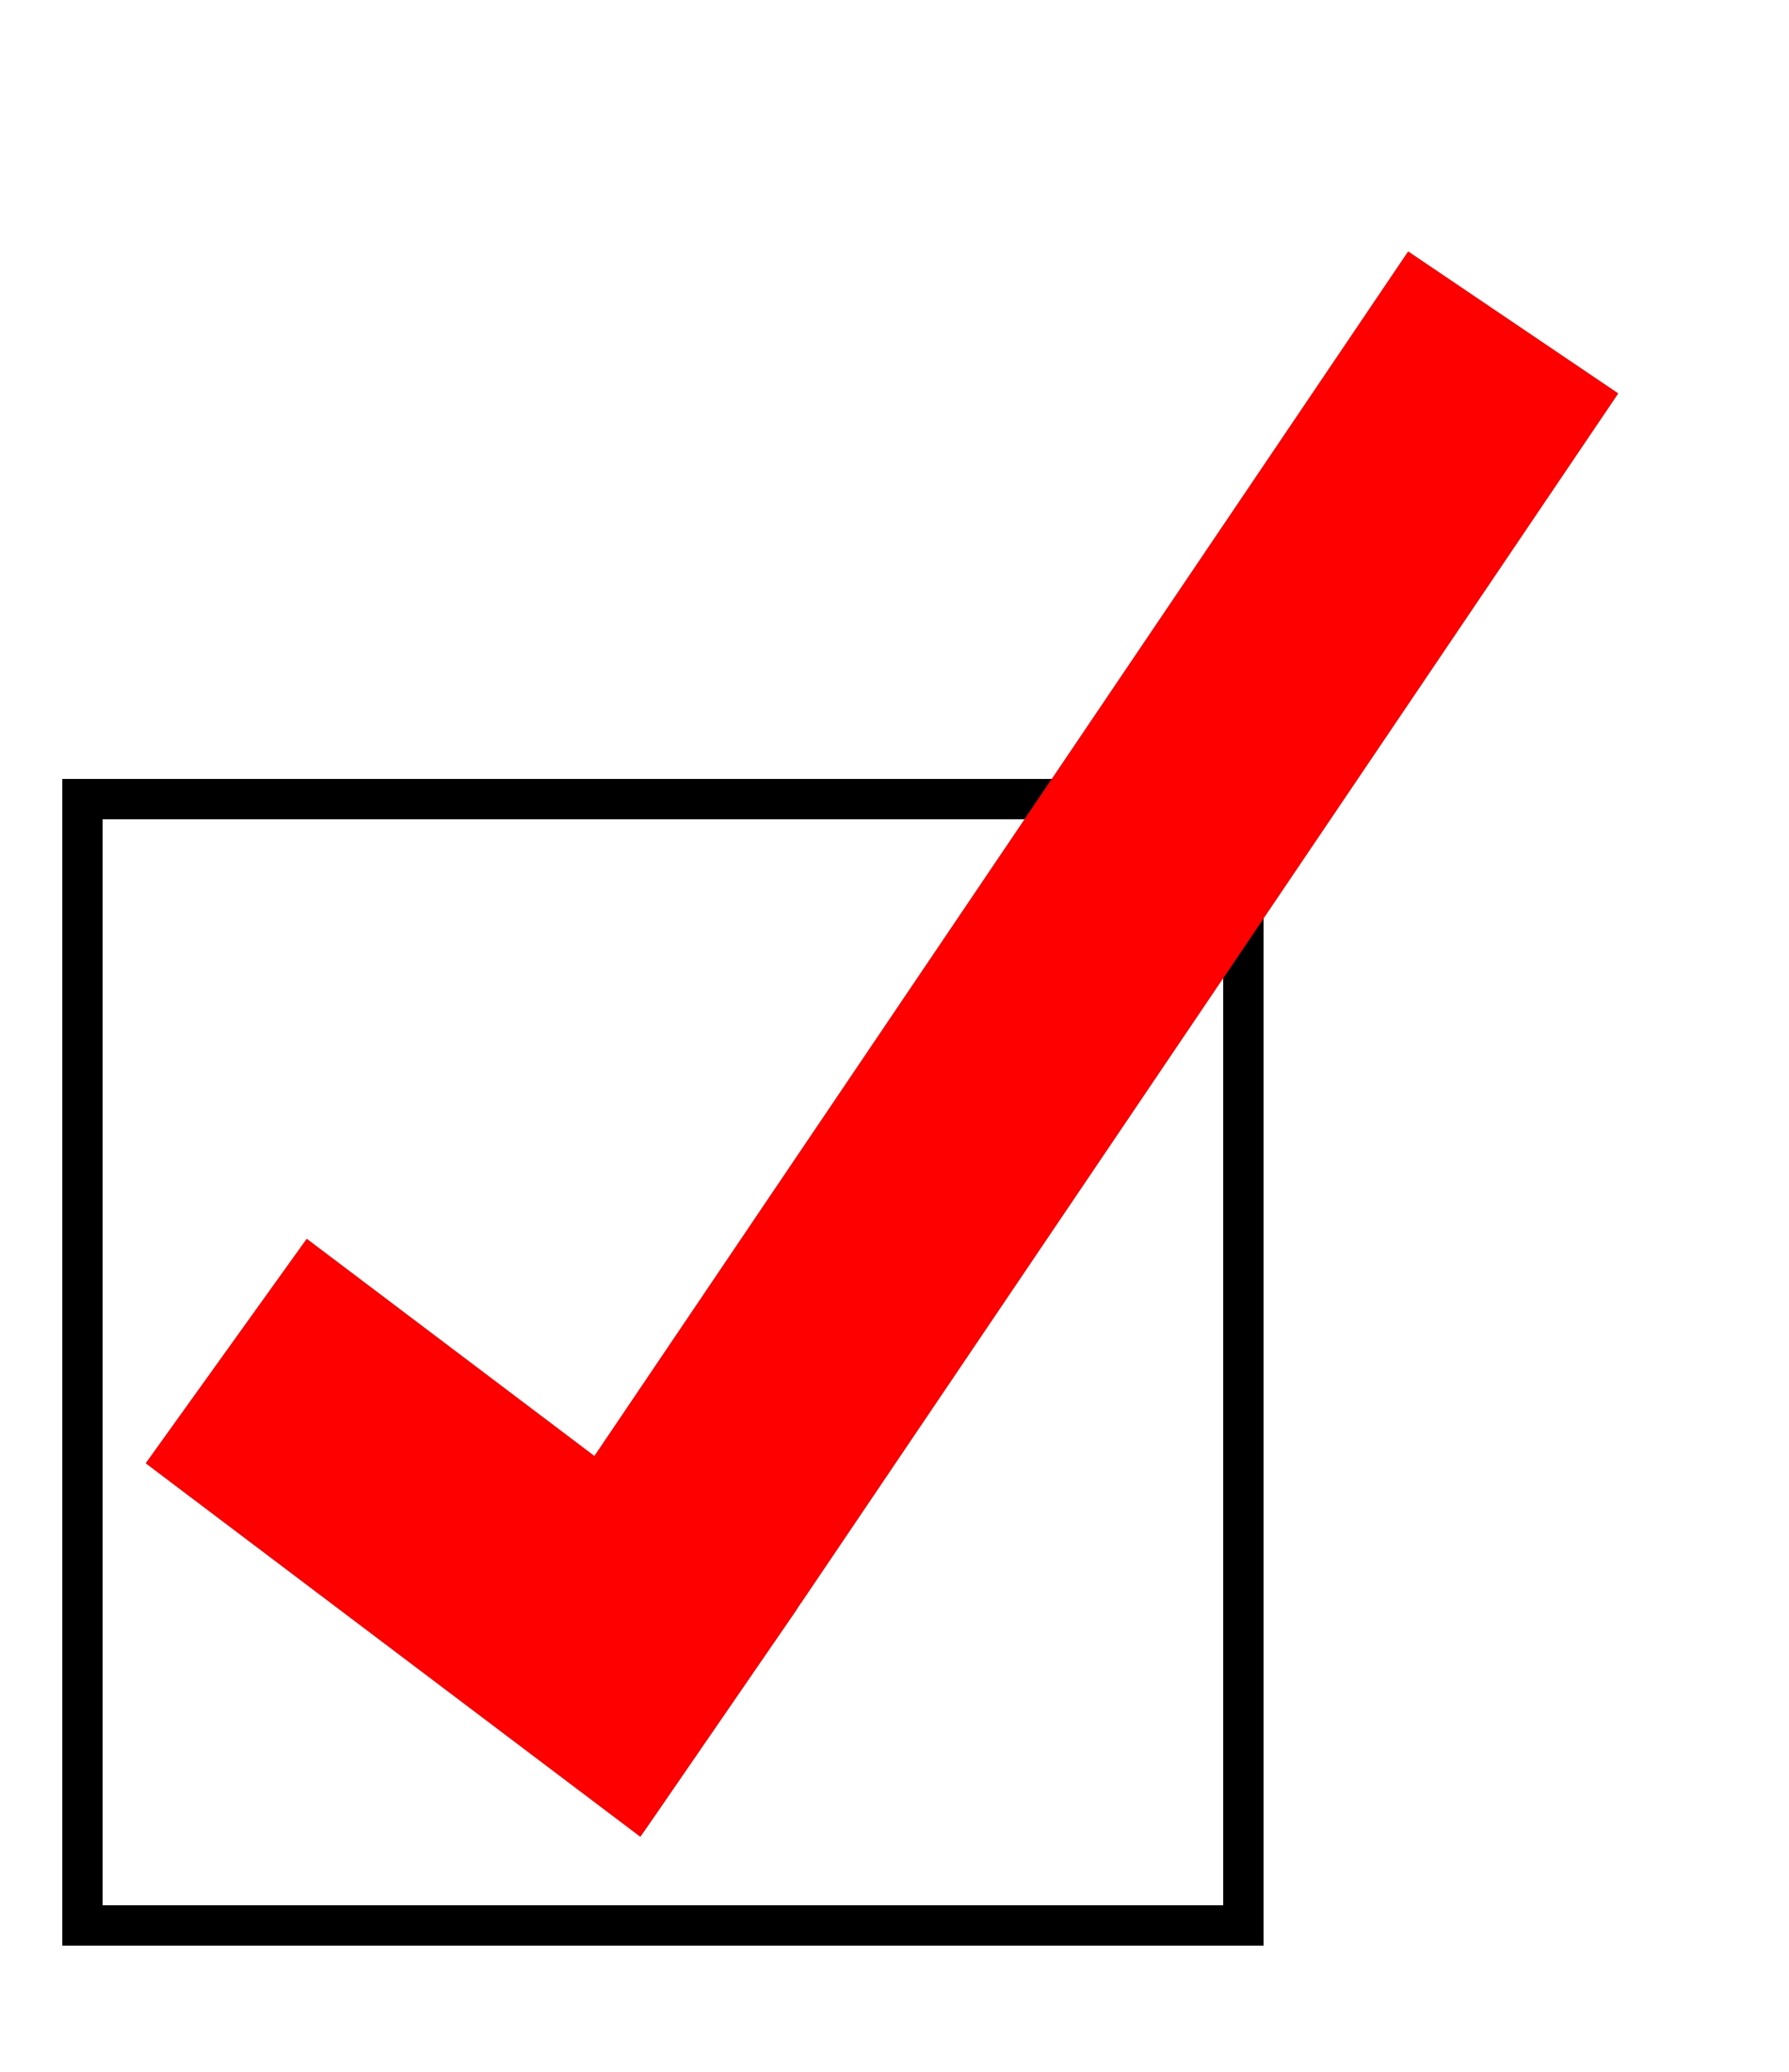 Red check mark in clipart - dbclipart.com